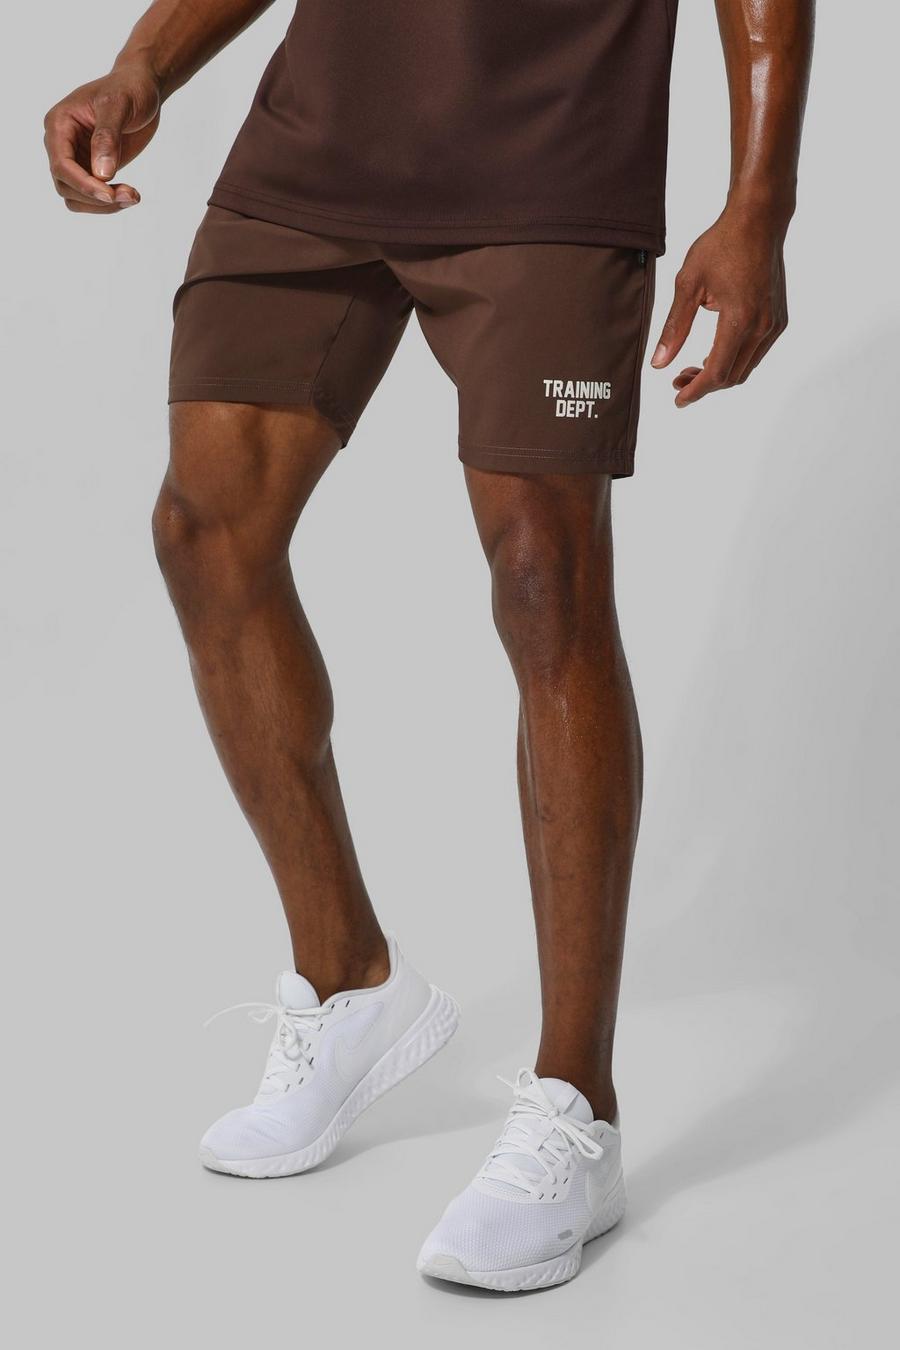 Tall Man Active Performance Trainings Dept Shorts, Chocolate marron image number 1